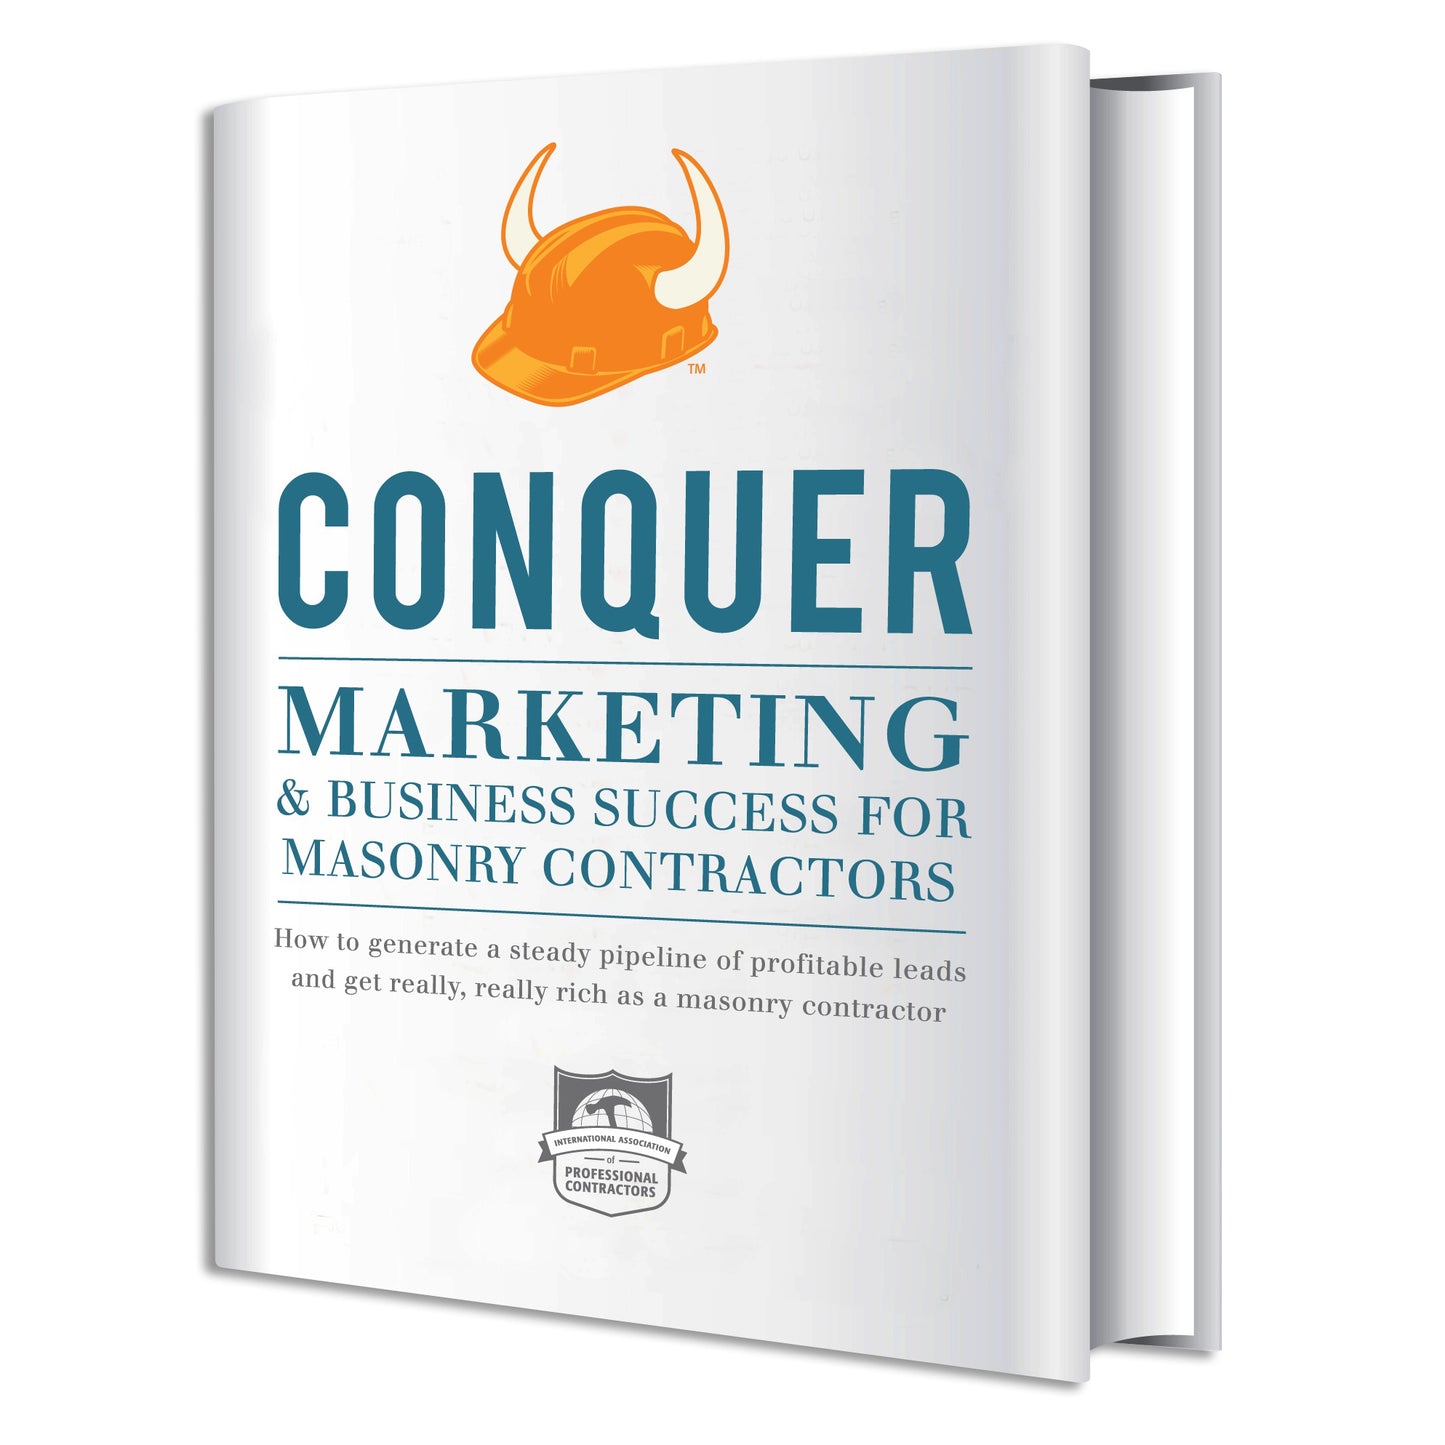 CONQUER Marketing and Business Success for Masonry Contractors PDF